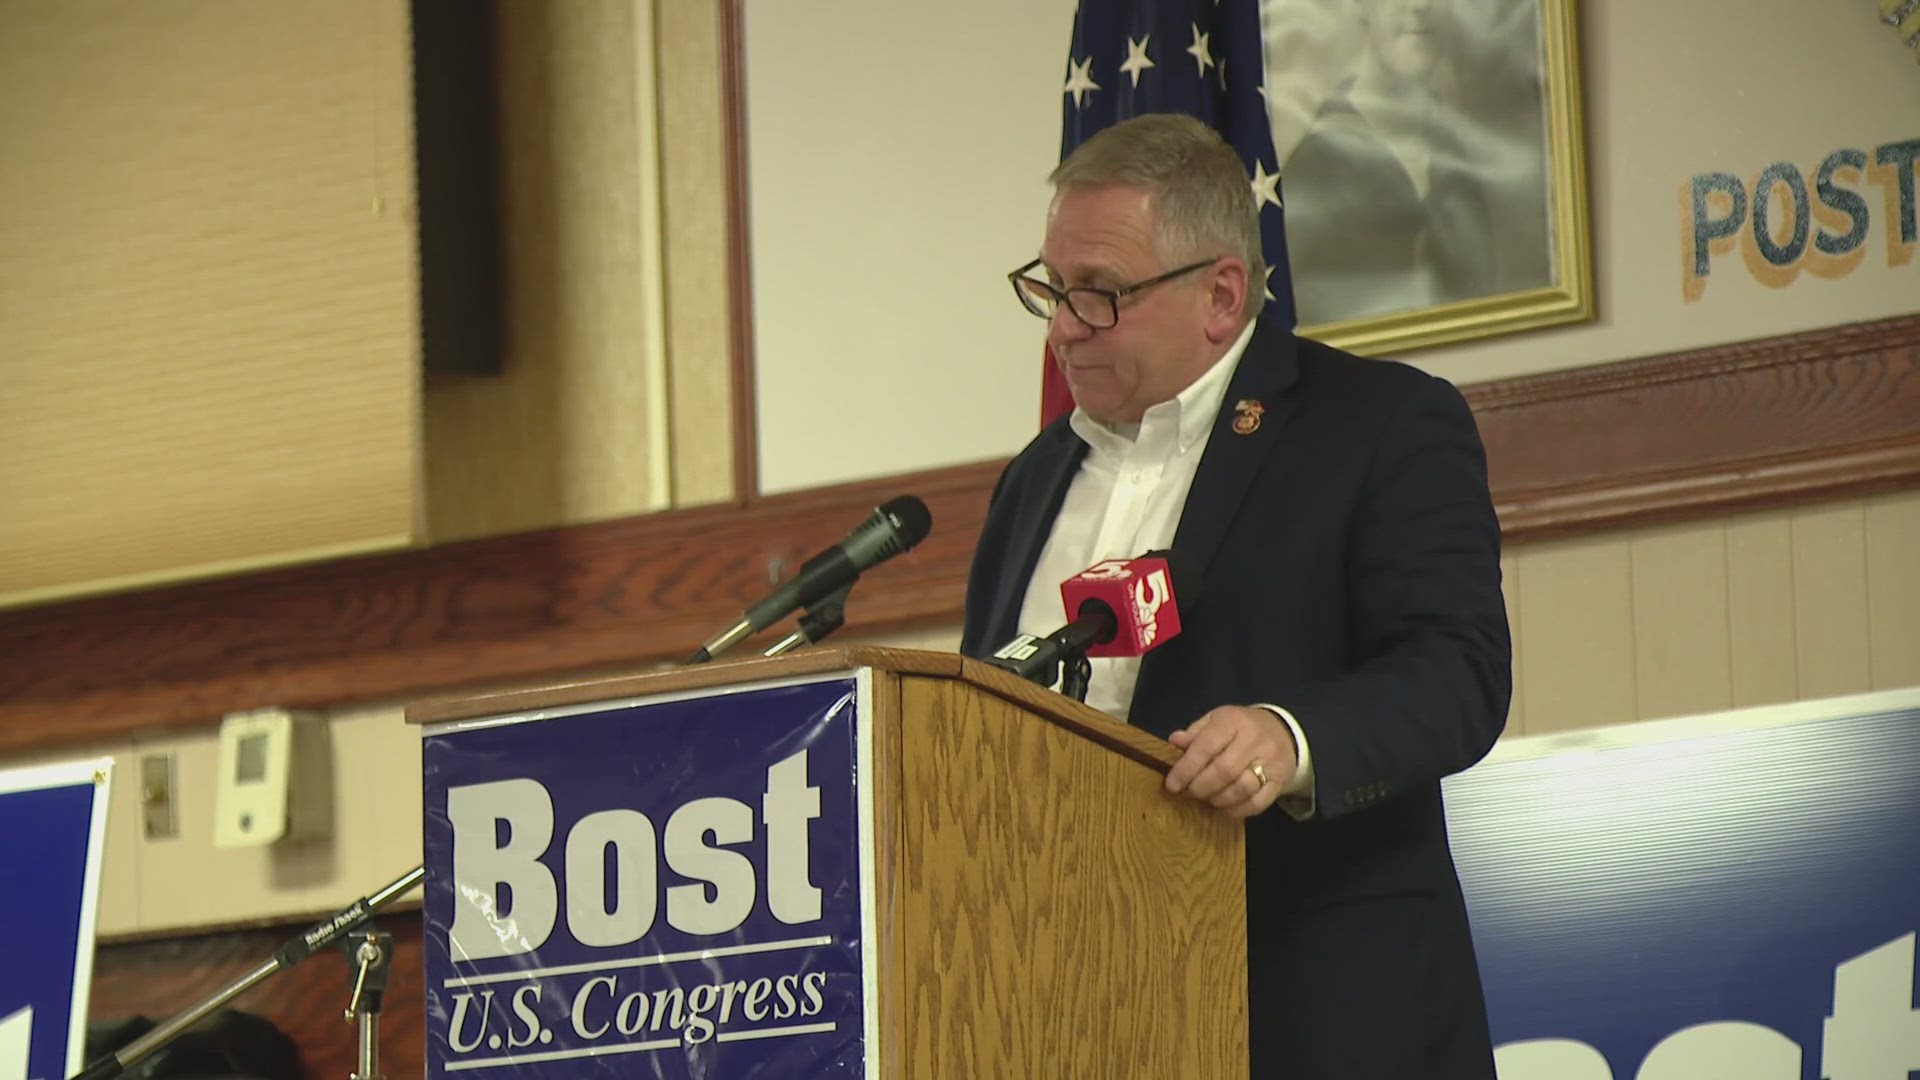 Mike Bost was on stage at a VFW Hall with two Texas Republicans, highlighting the border and immigration.